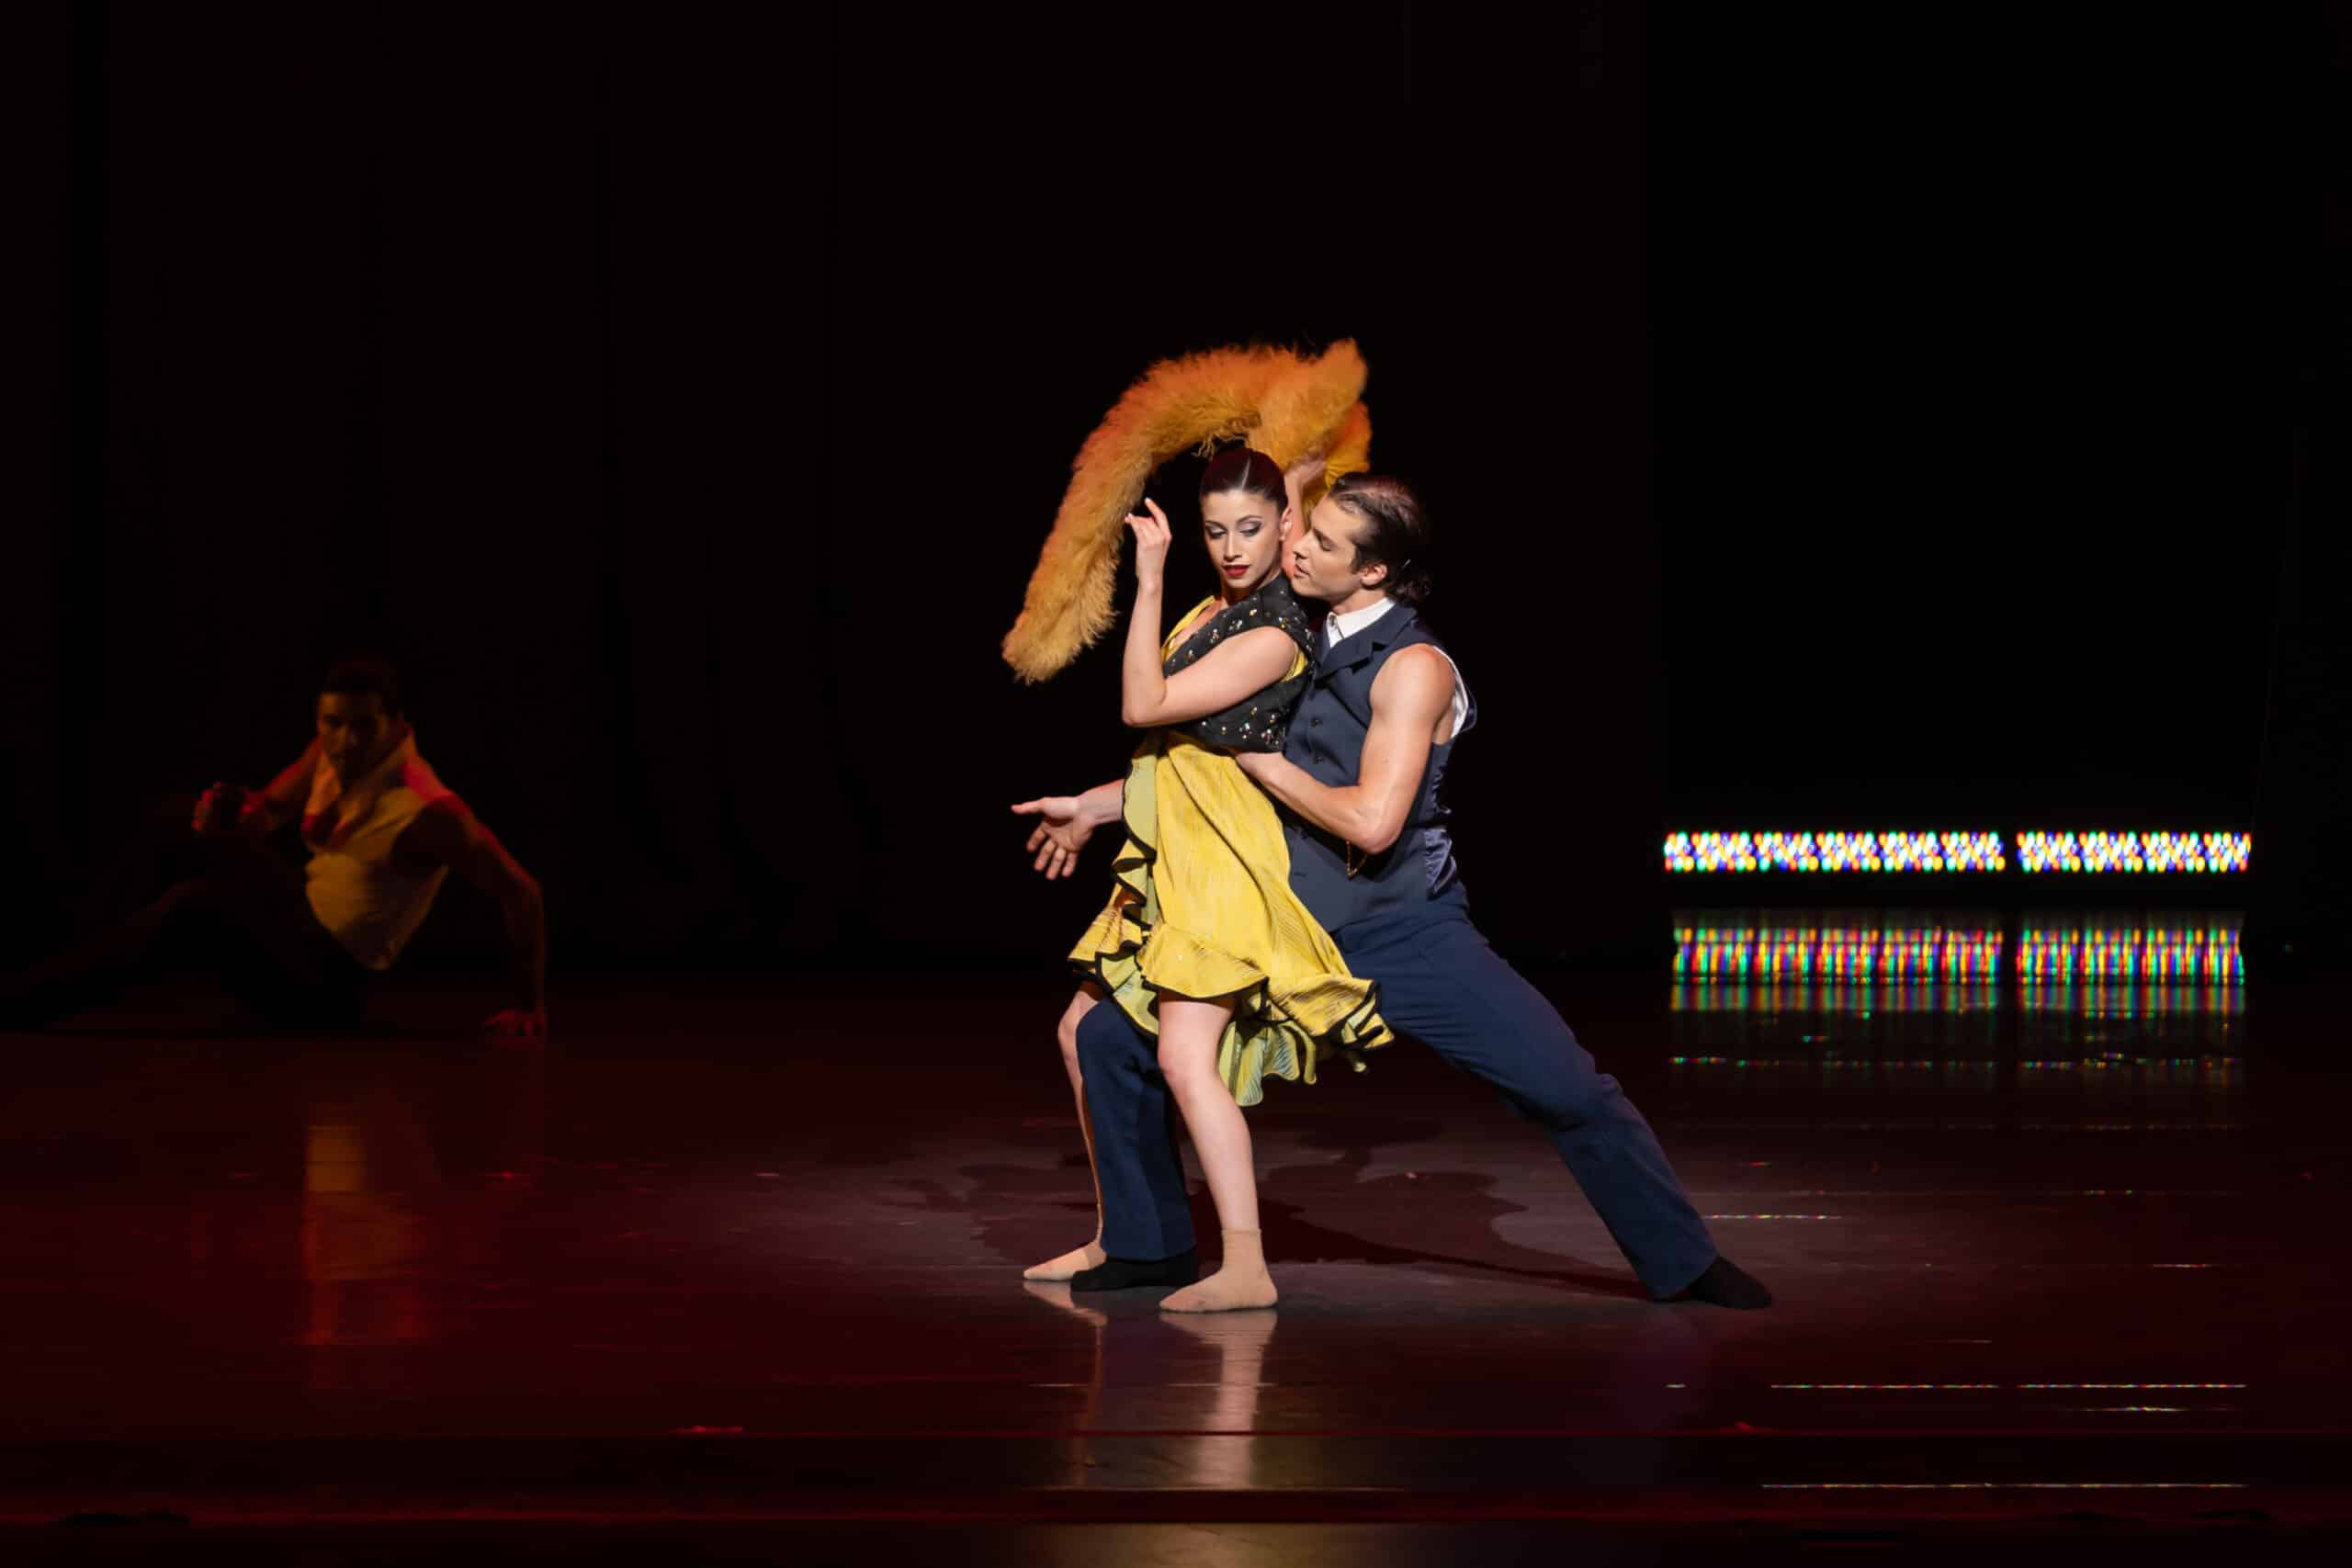 female and male embrace in dance pose